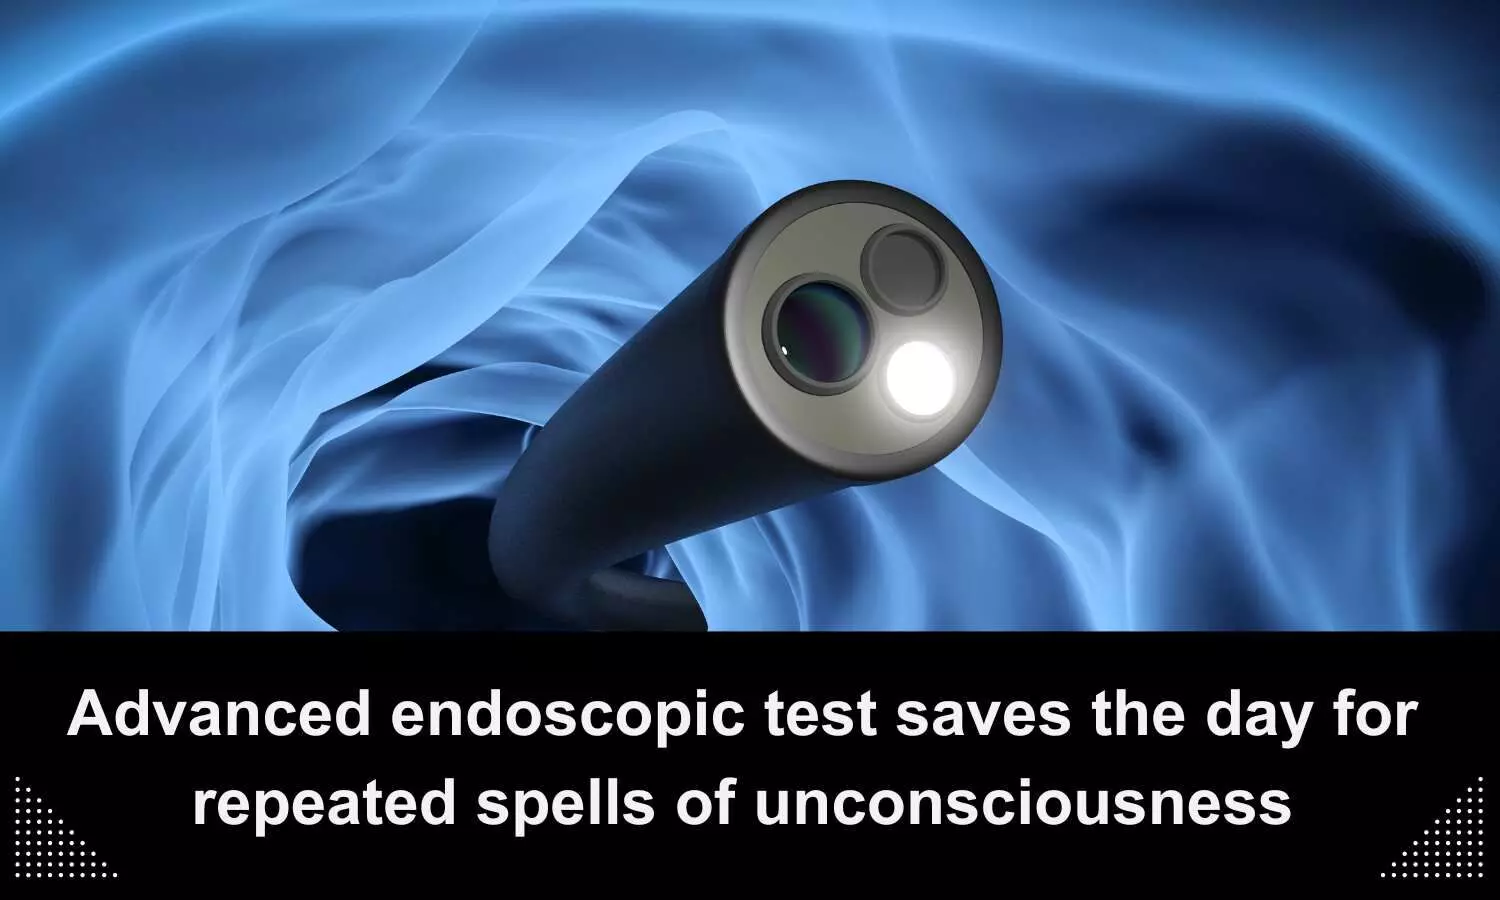 Advanced endoscopic test saves day for repeated spells of unconsciousness